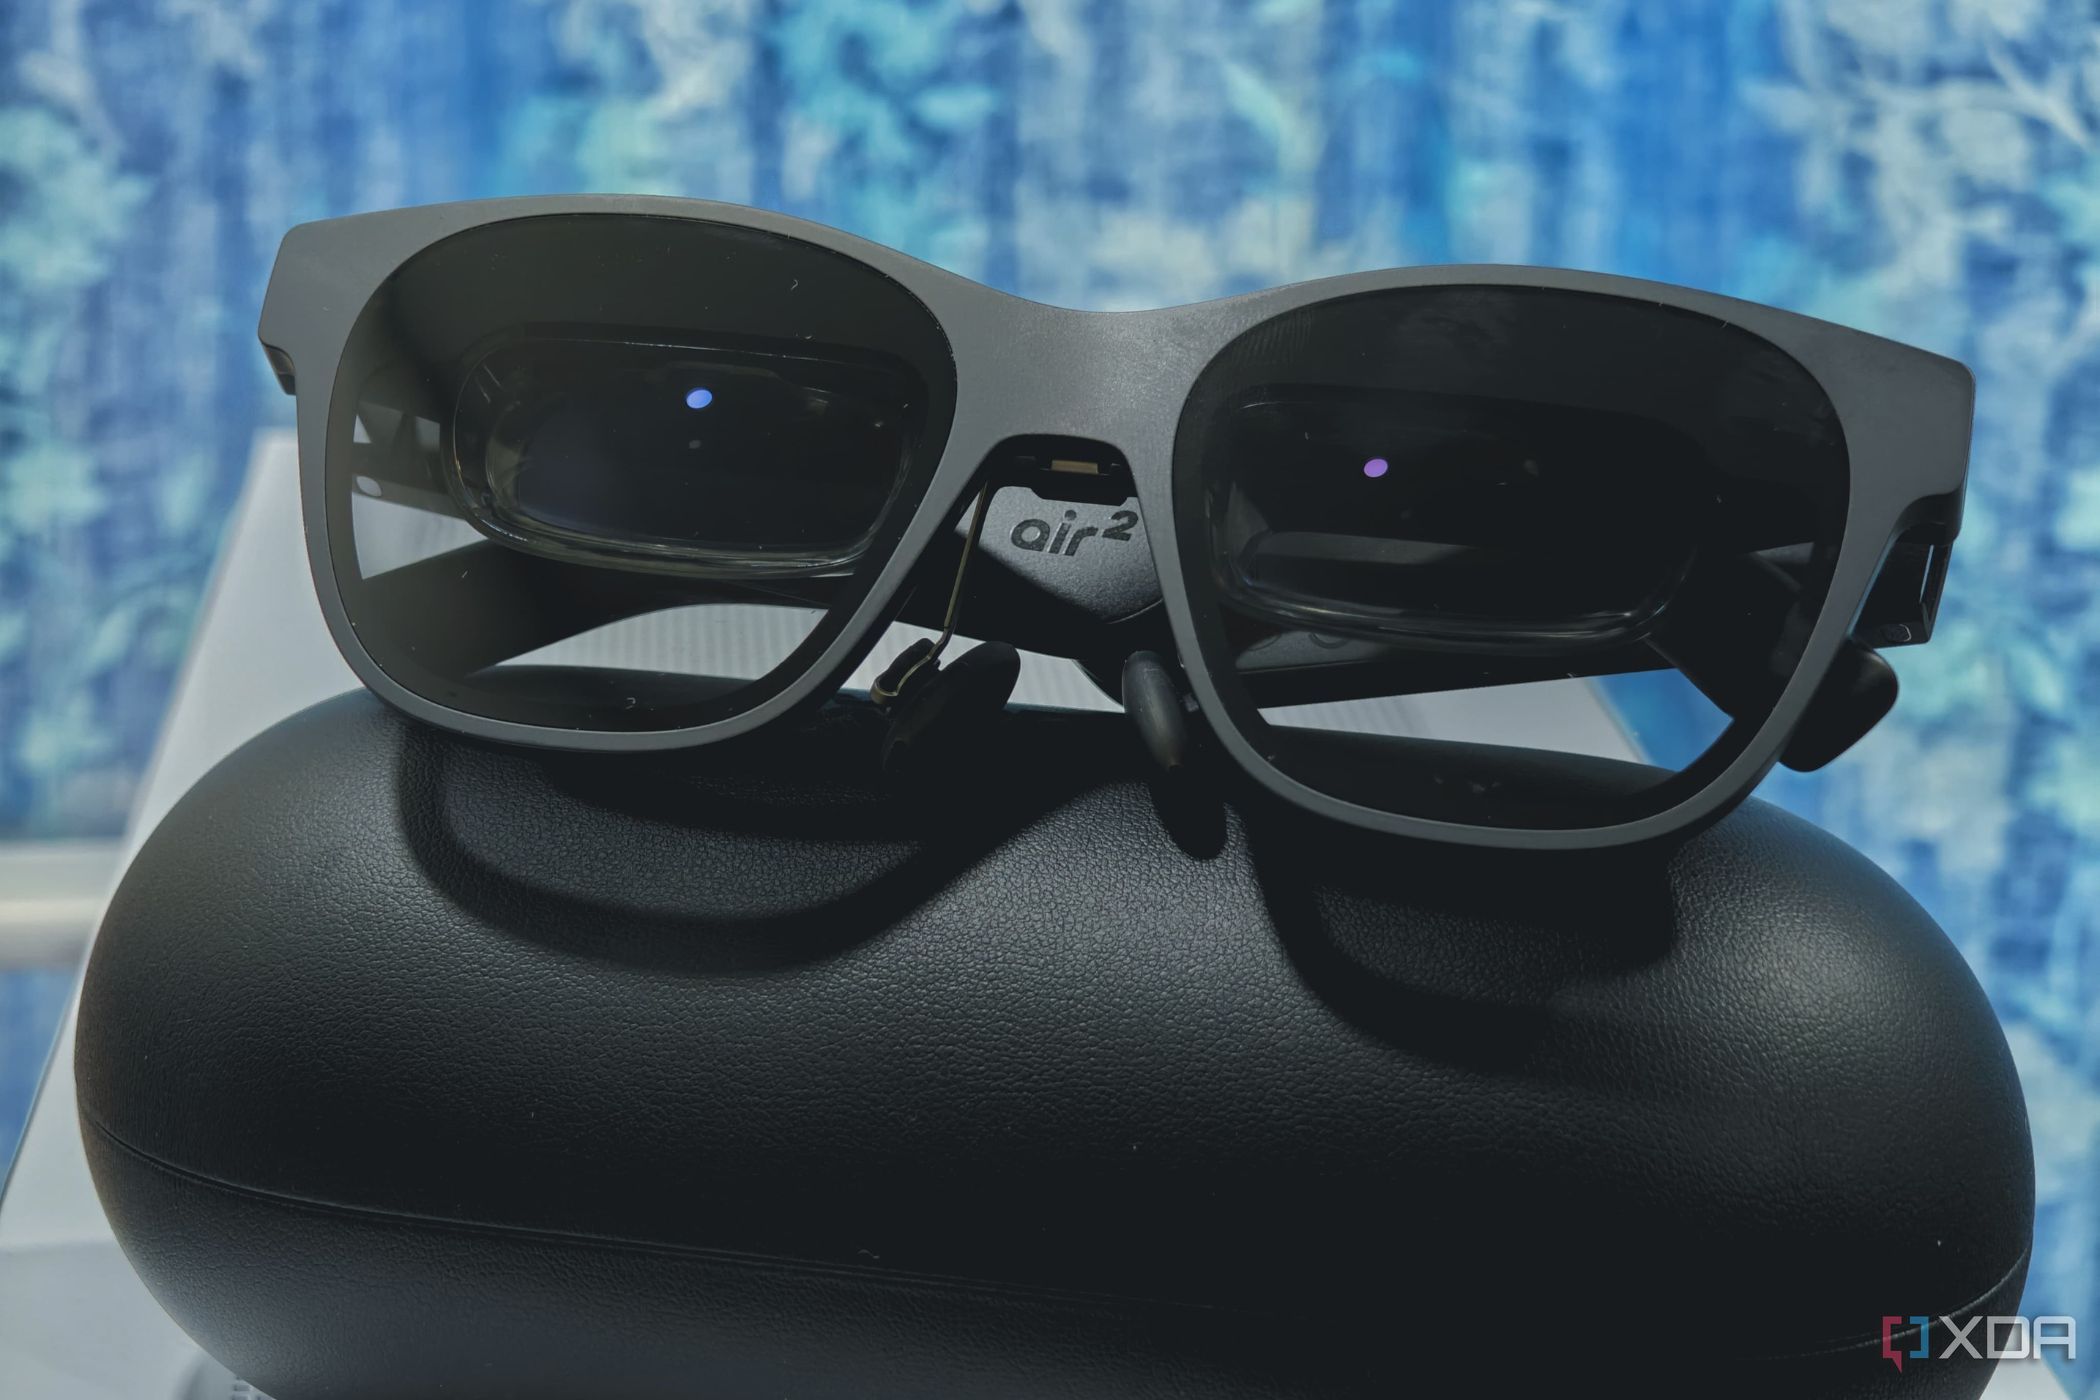 An image showing the XREAL Air 2 AR glasses that's kept on its carrying case.